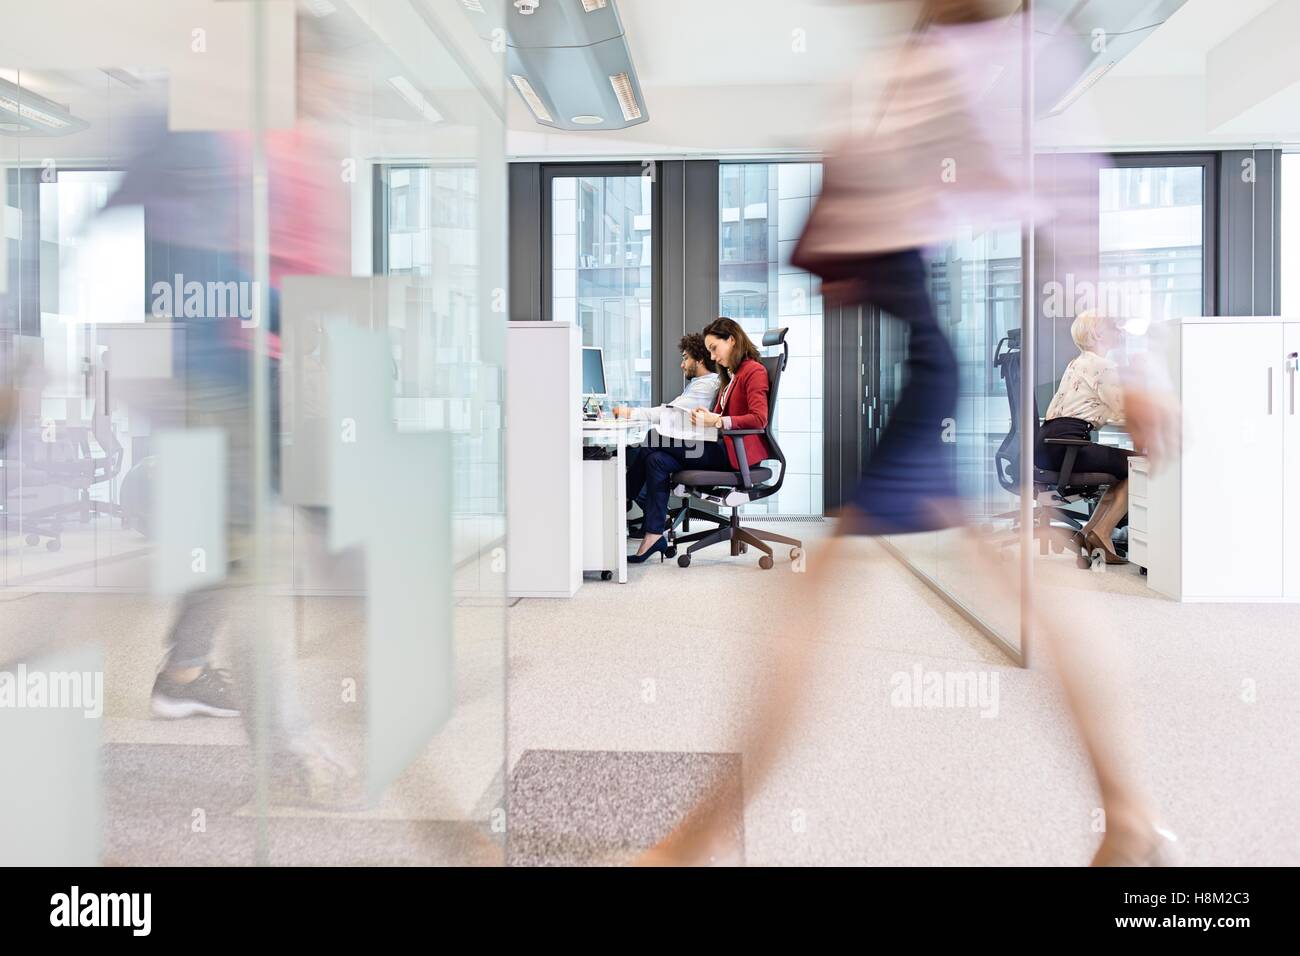 Blurred motion of businesswoman walking with colleagues working in background at office Stock Photo